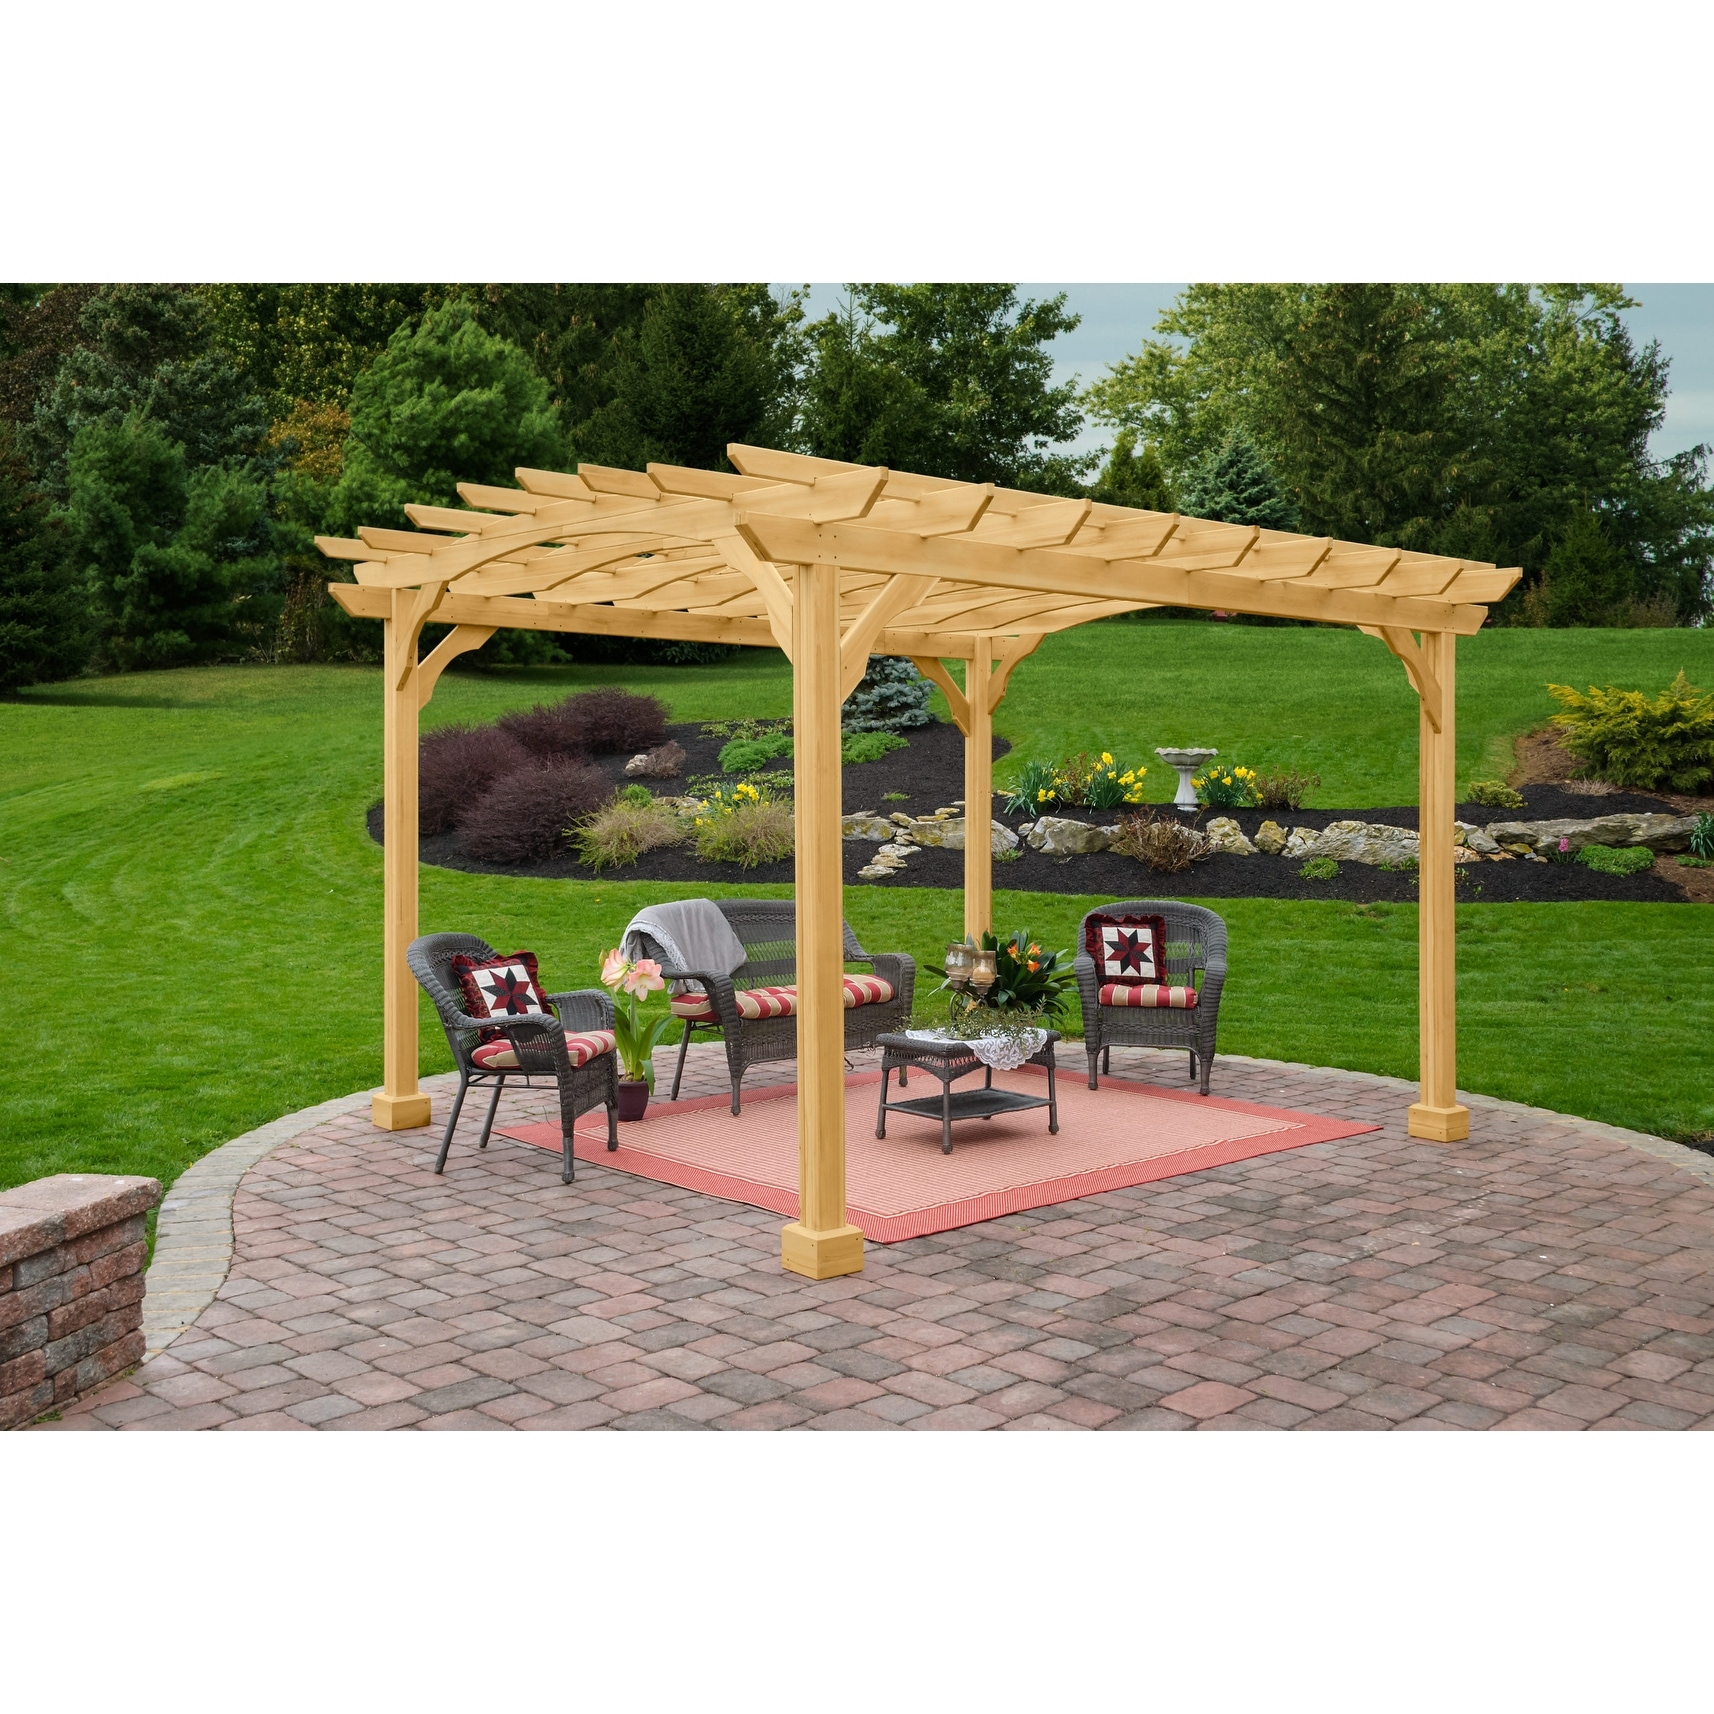 10x12 Wood Pergola Kit for Sale - YardCraft | DIY Pergola Kit in Canyon  Brown Stain - Includes Curbside Delivery